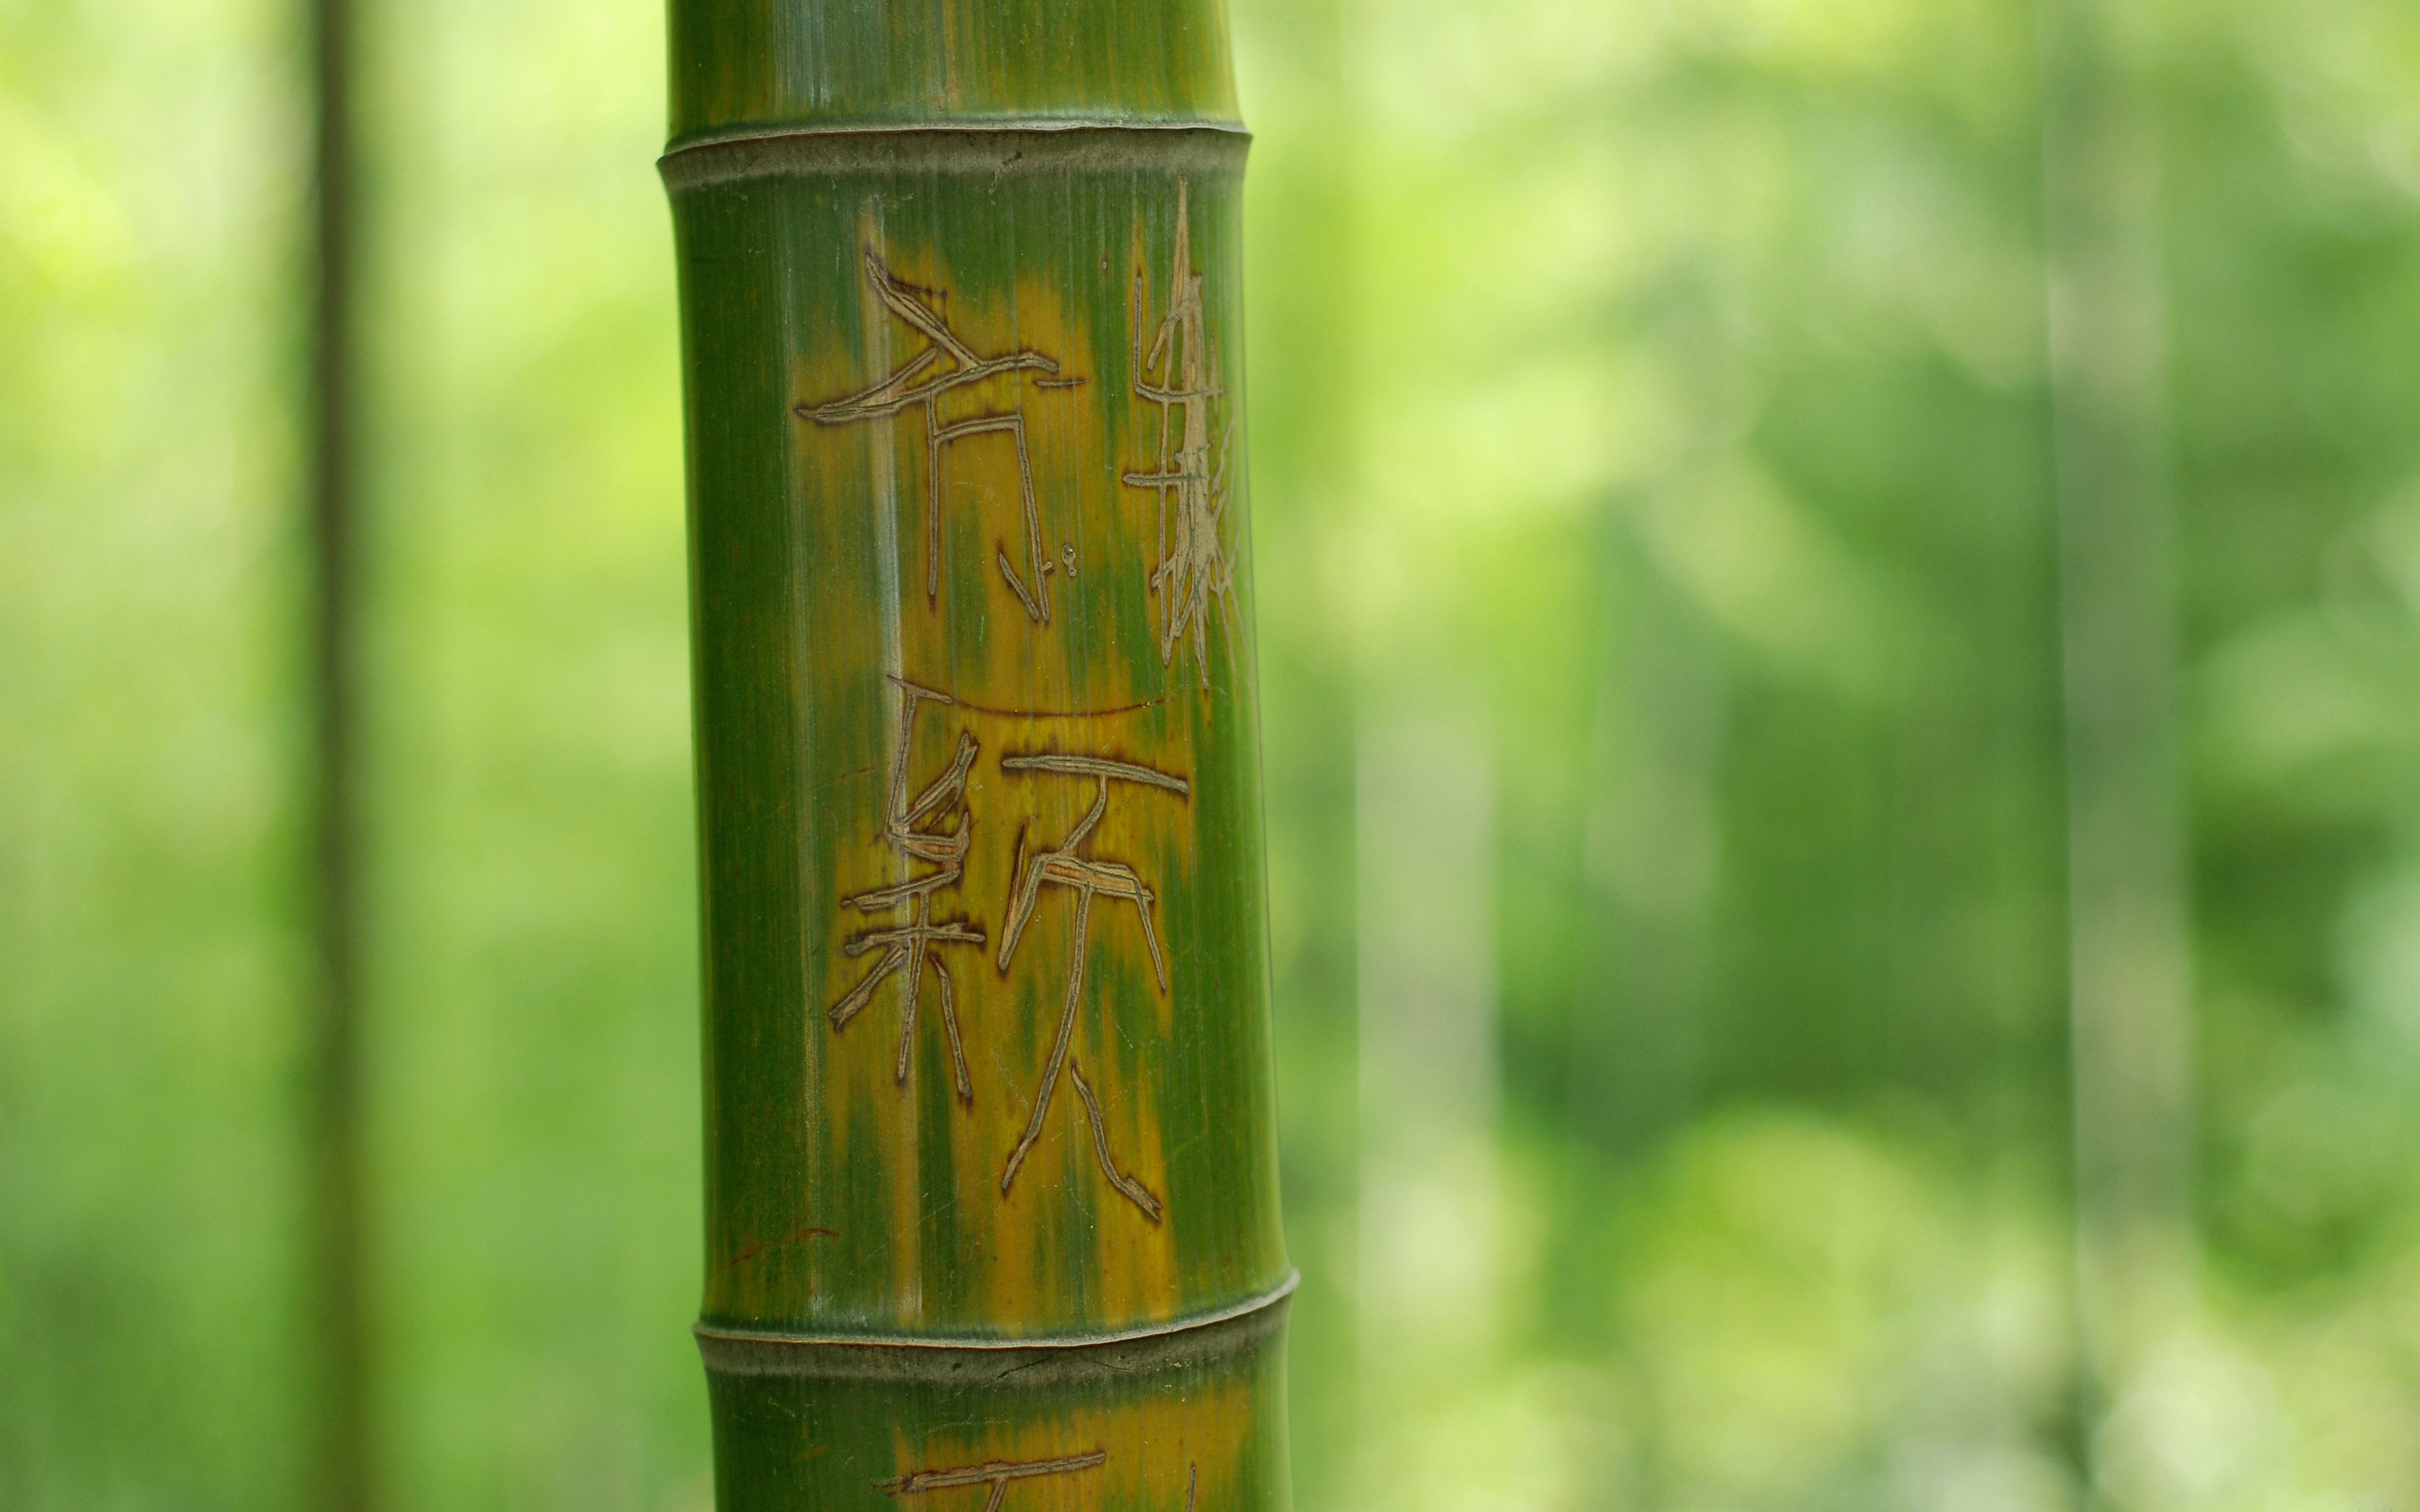 Earth Bamboo HD Wallpaper | Background Image